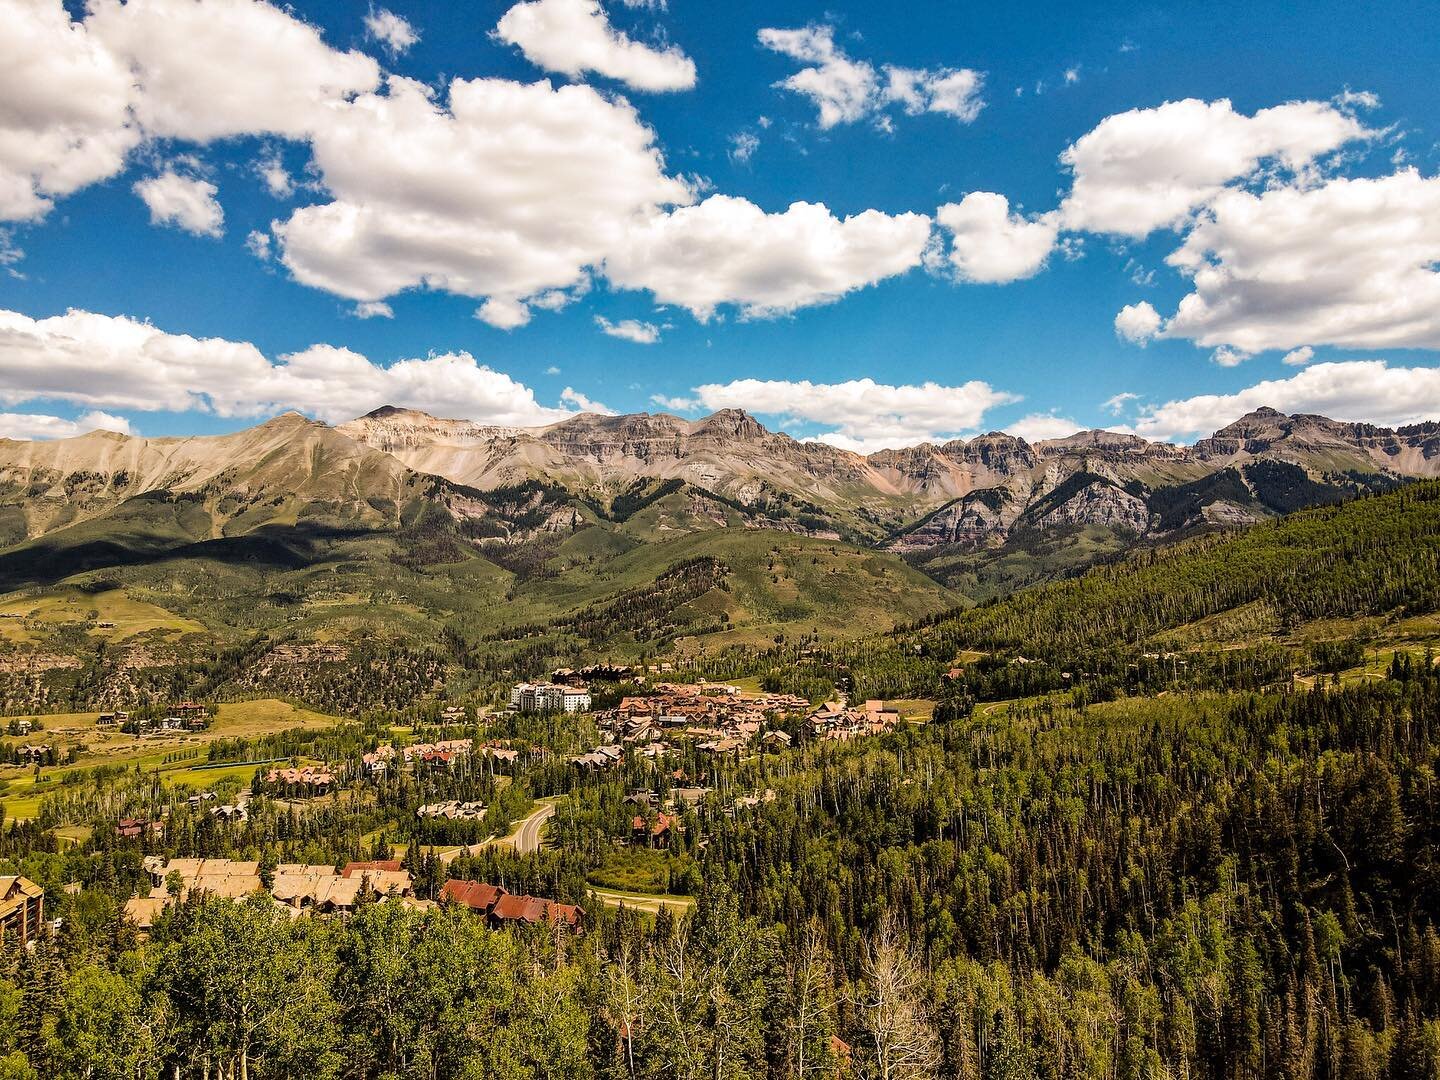 Check out our awesome drone shot from our site visit to Telluride! We strive to be on the forefront of technology and keep up to date. This allows us to give our clients an accurate representation of their property!

#kadesignworks 
.
.
.
.
#drone #d